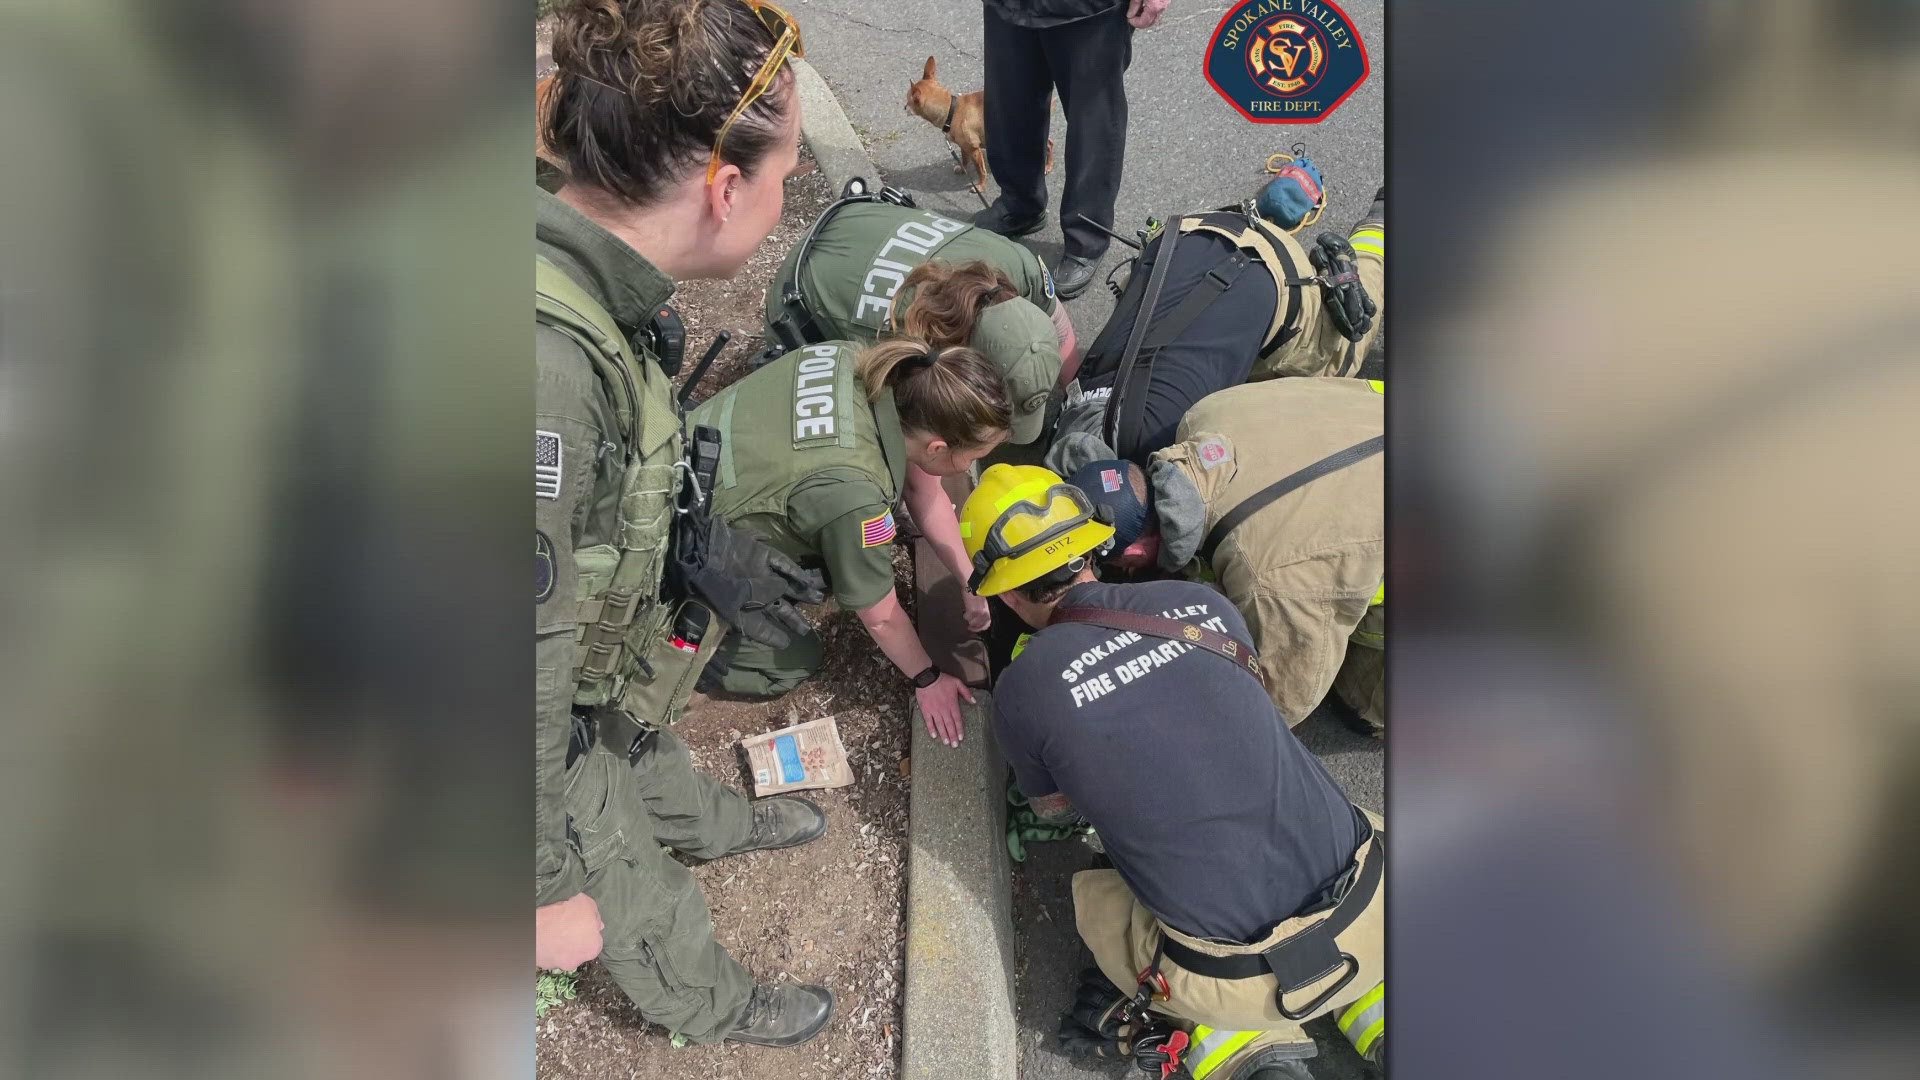 The dog was unharmed and is home safe after a group of of emergency crews stepped in to save the animal that fell into a storm drain.